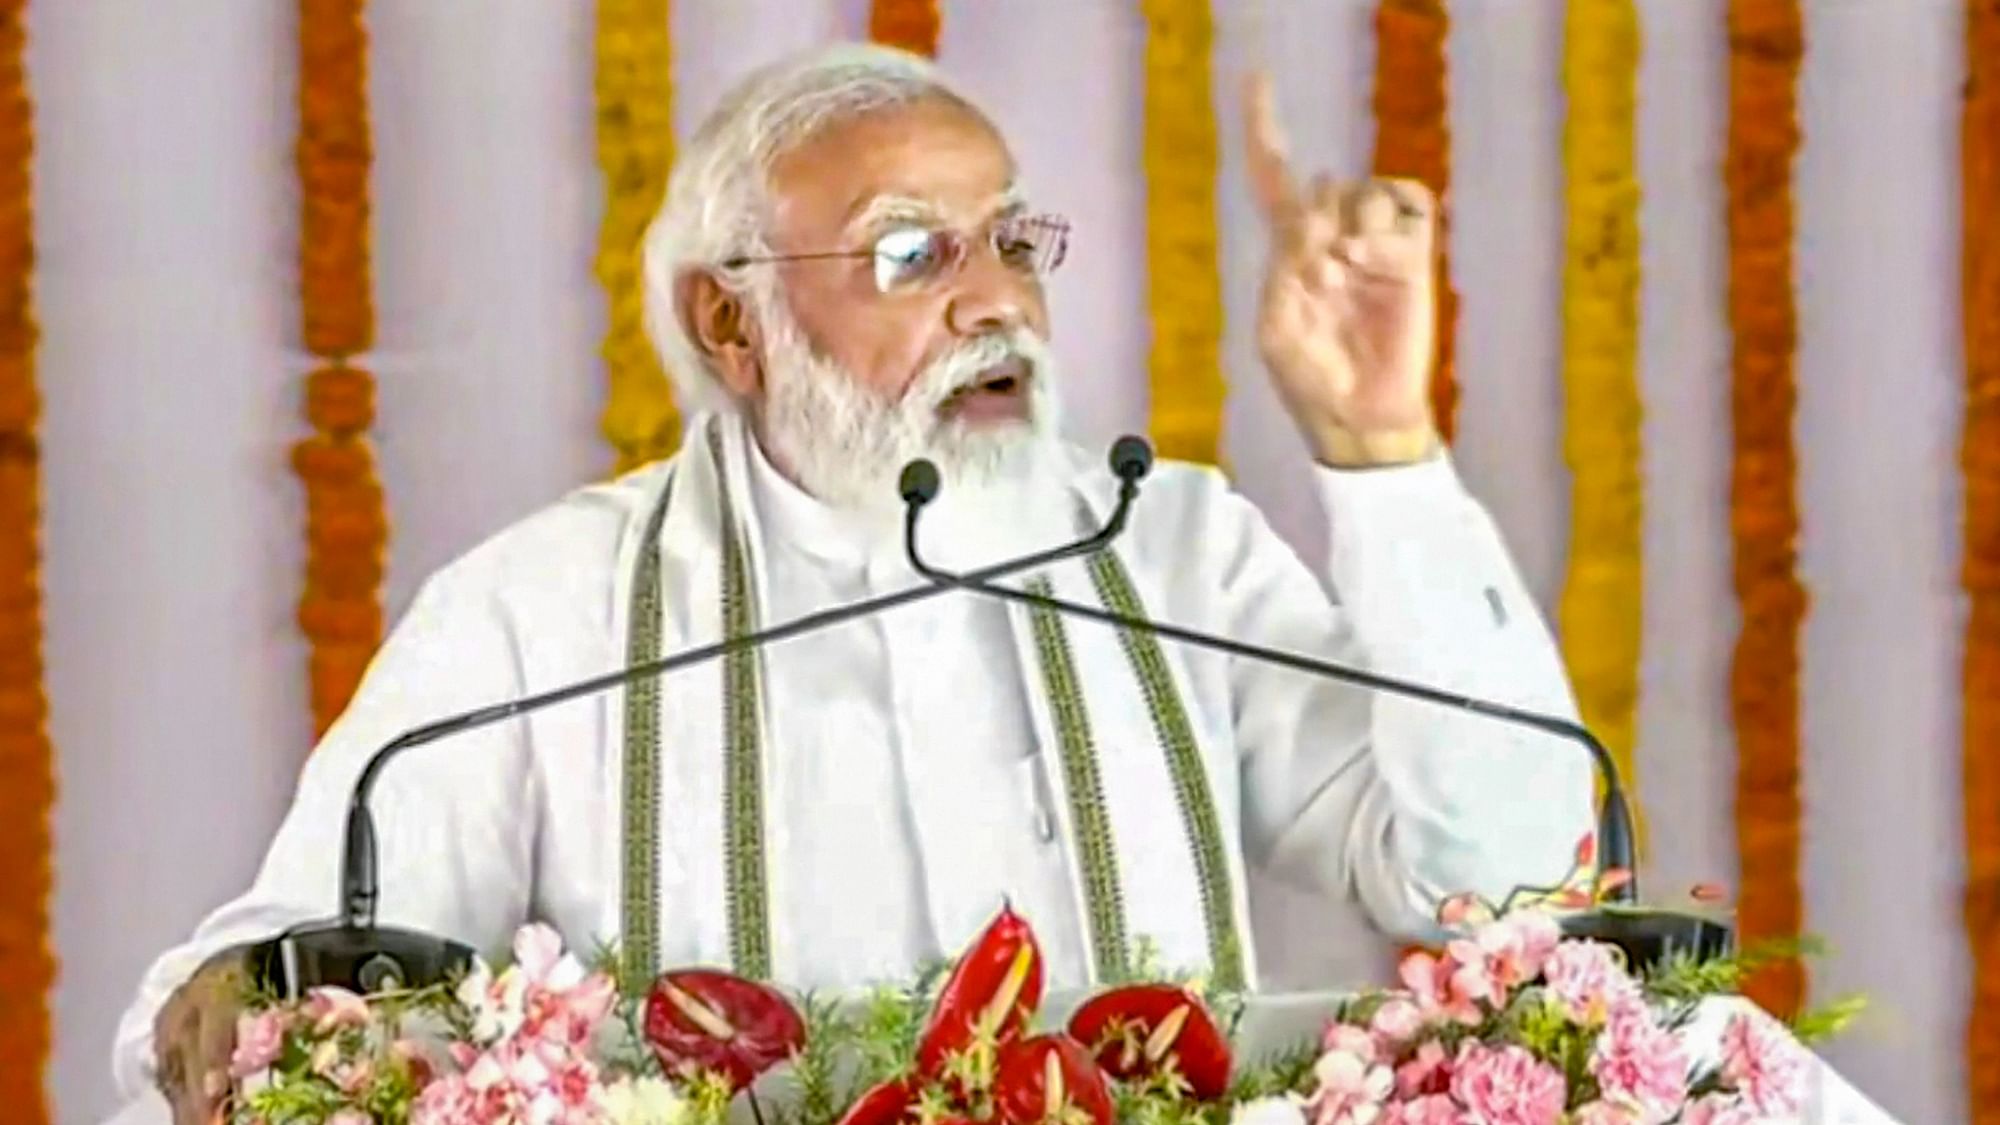 <div class="paragraphs"><p>Prime Minister Narendra Modi addresses the crowd during the foundation stone laying ceremony of Raja Mahendra Pratap Singh State University in Aligarh.</p></div>